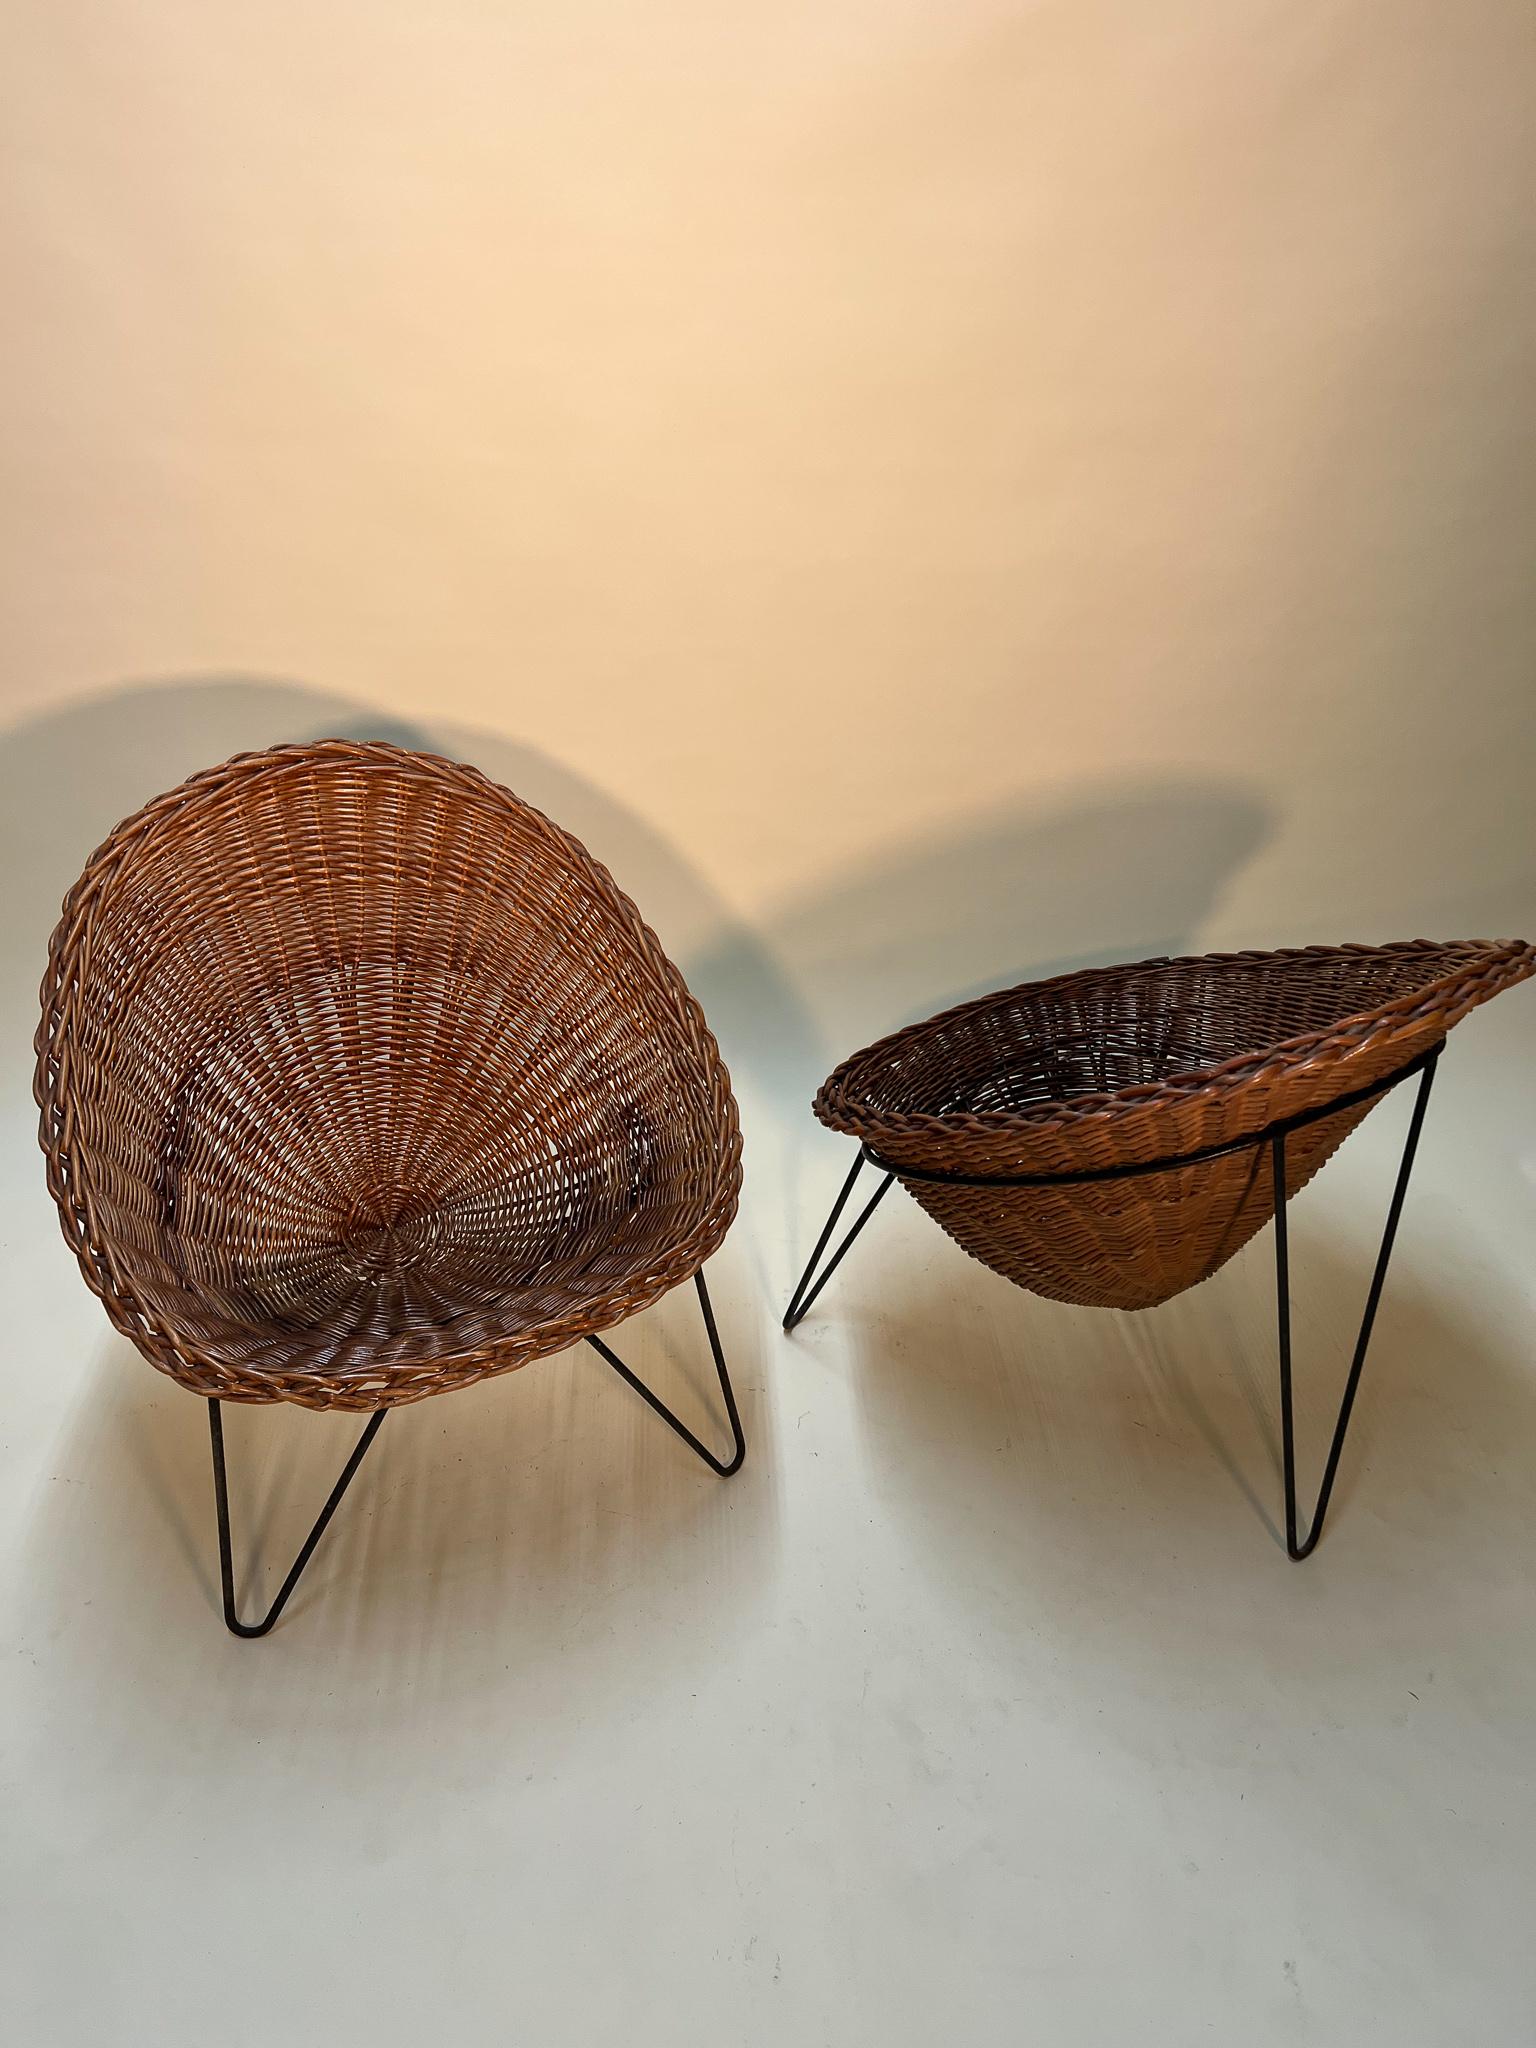 Caning Mid-Modern Woven Rattan Conical Round Chair Set with Table